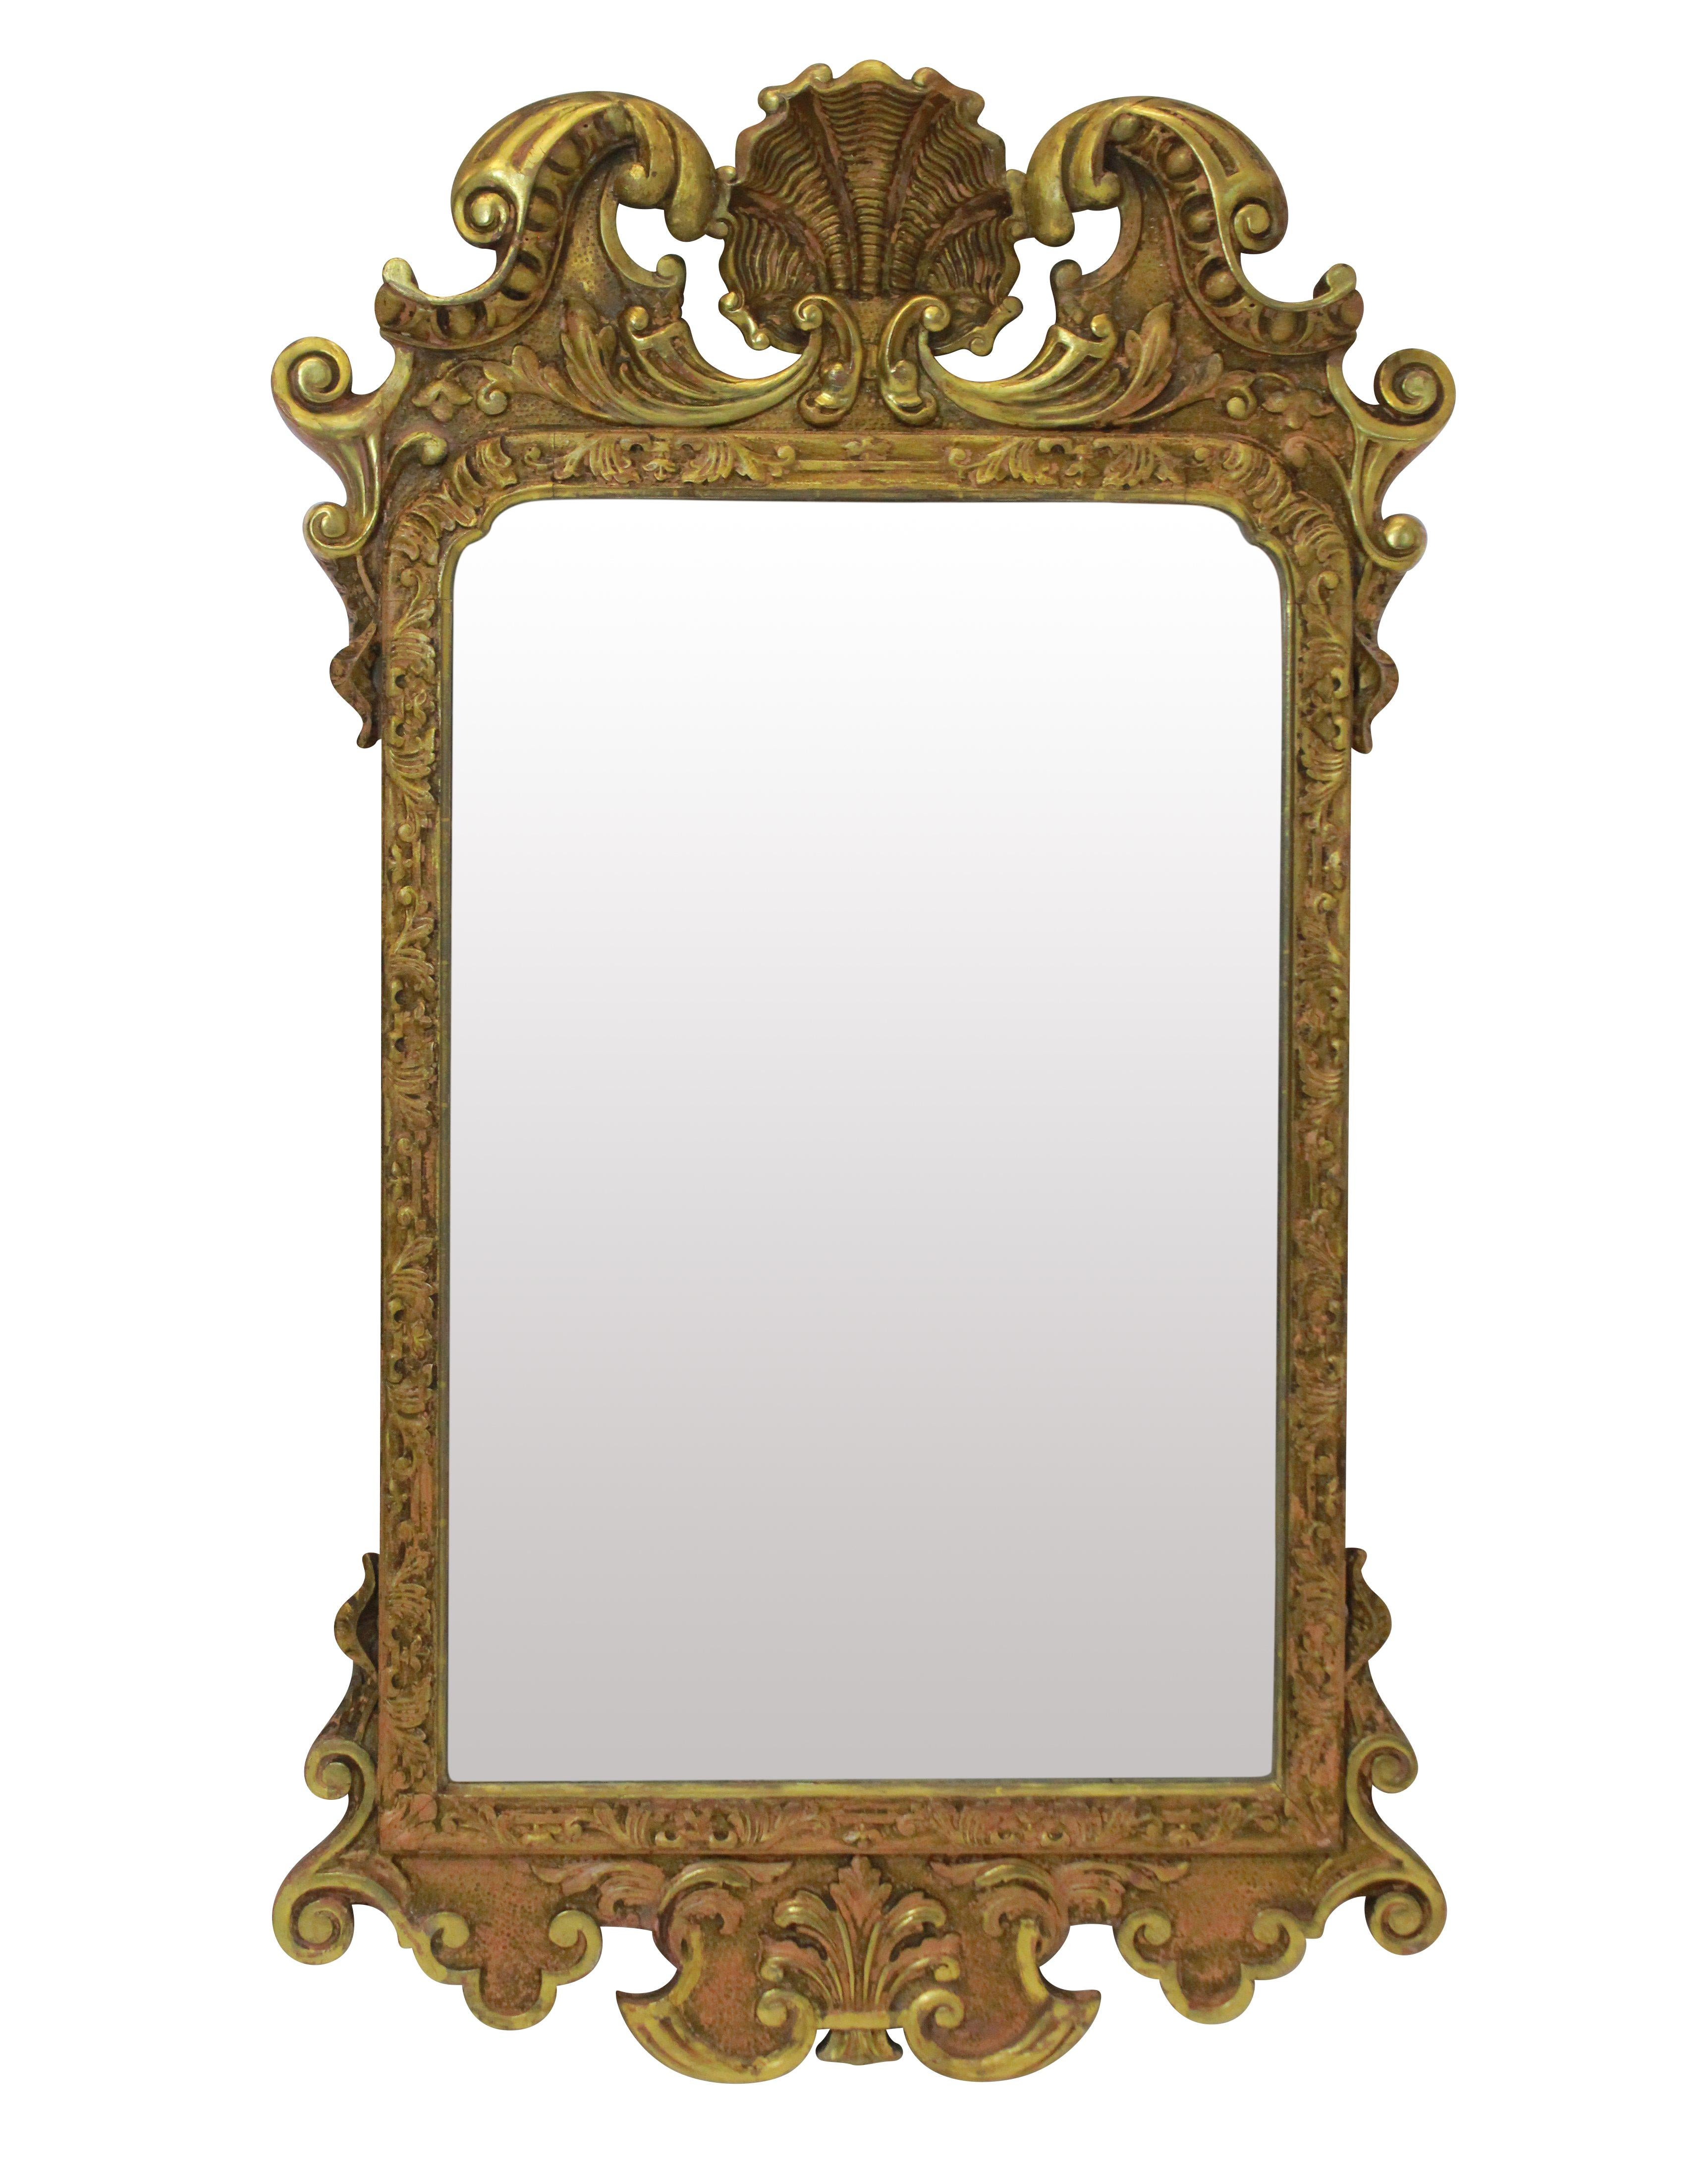 Early 19th Century Nicely Carved George III Gilt Wood Mirror